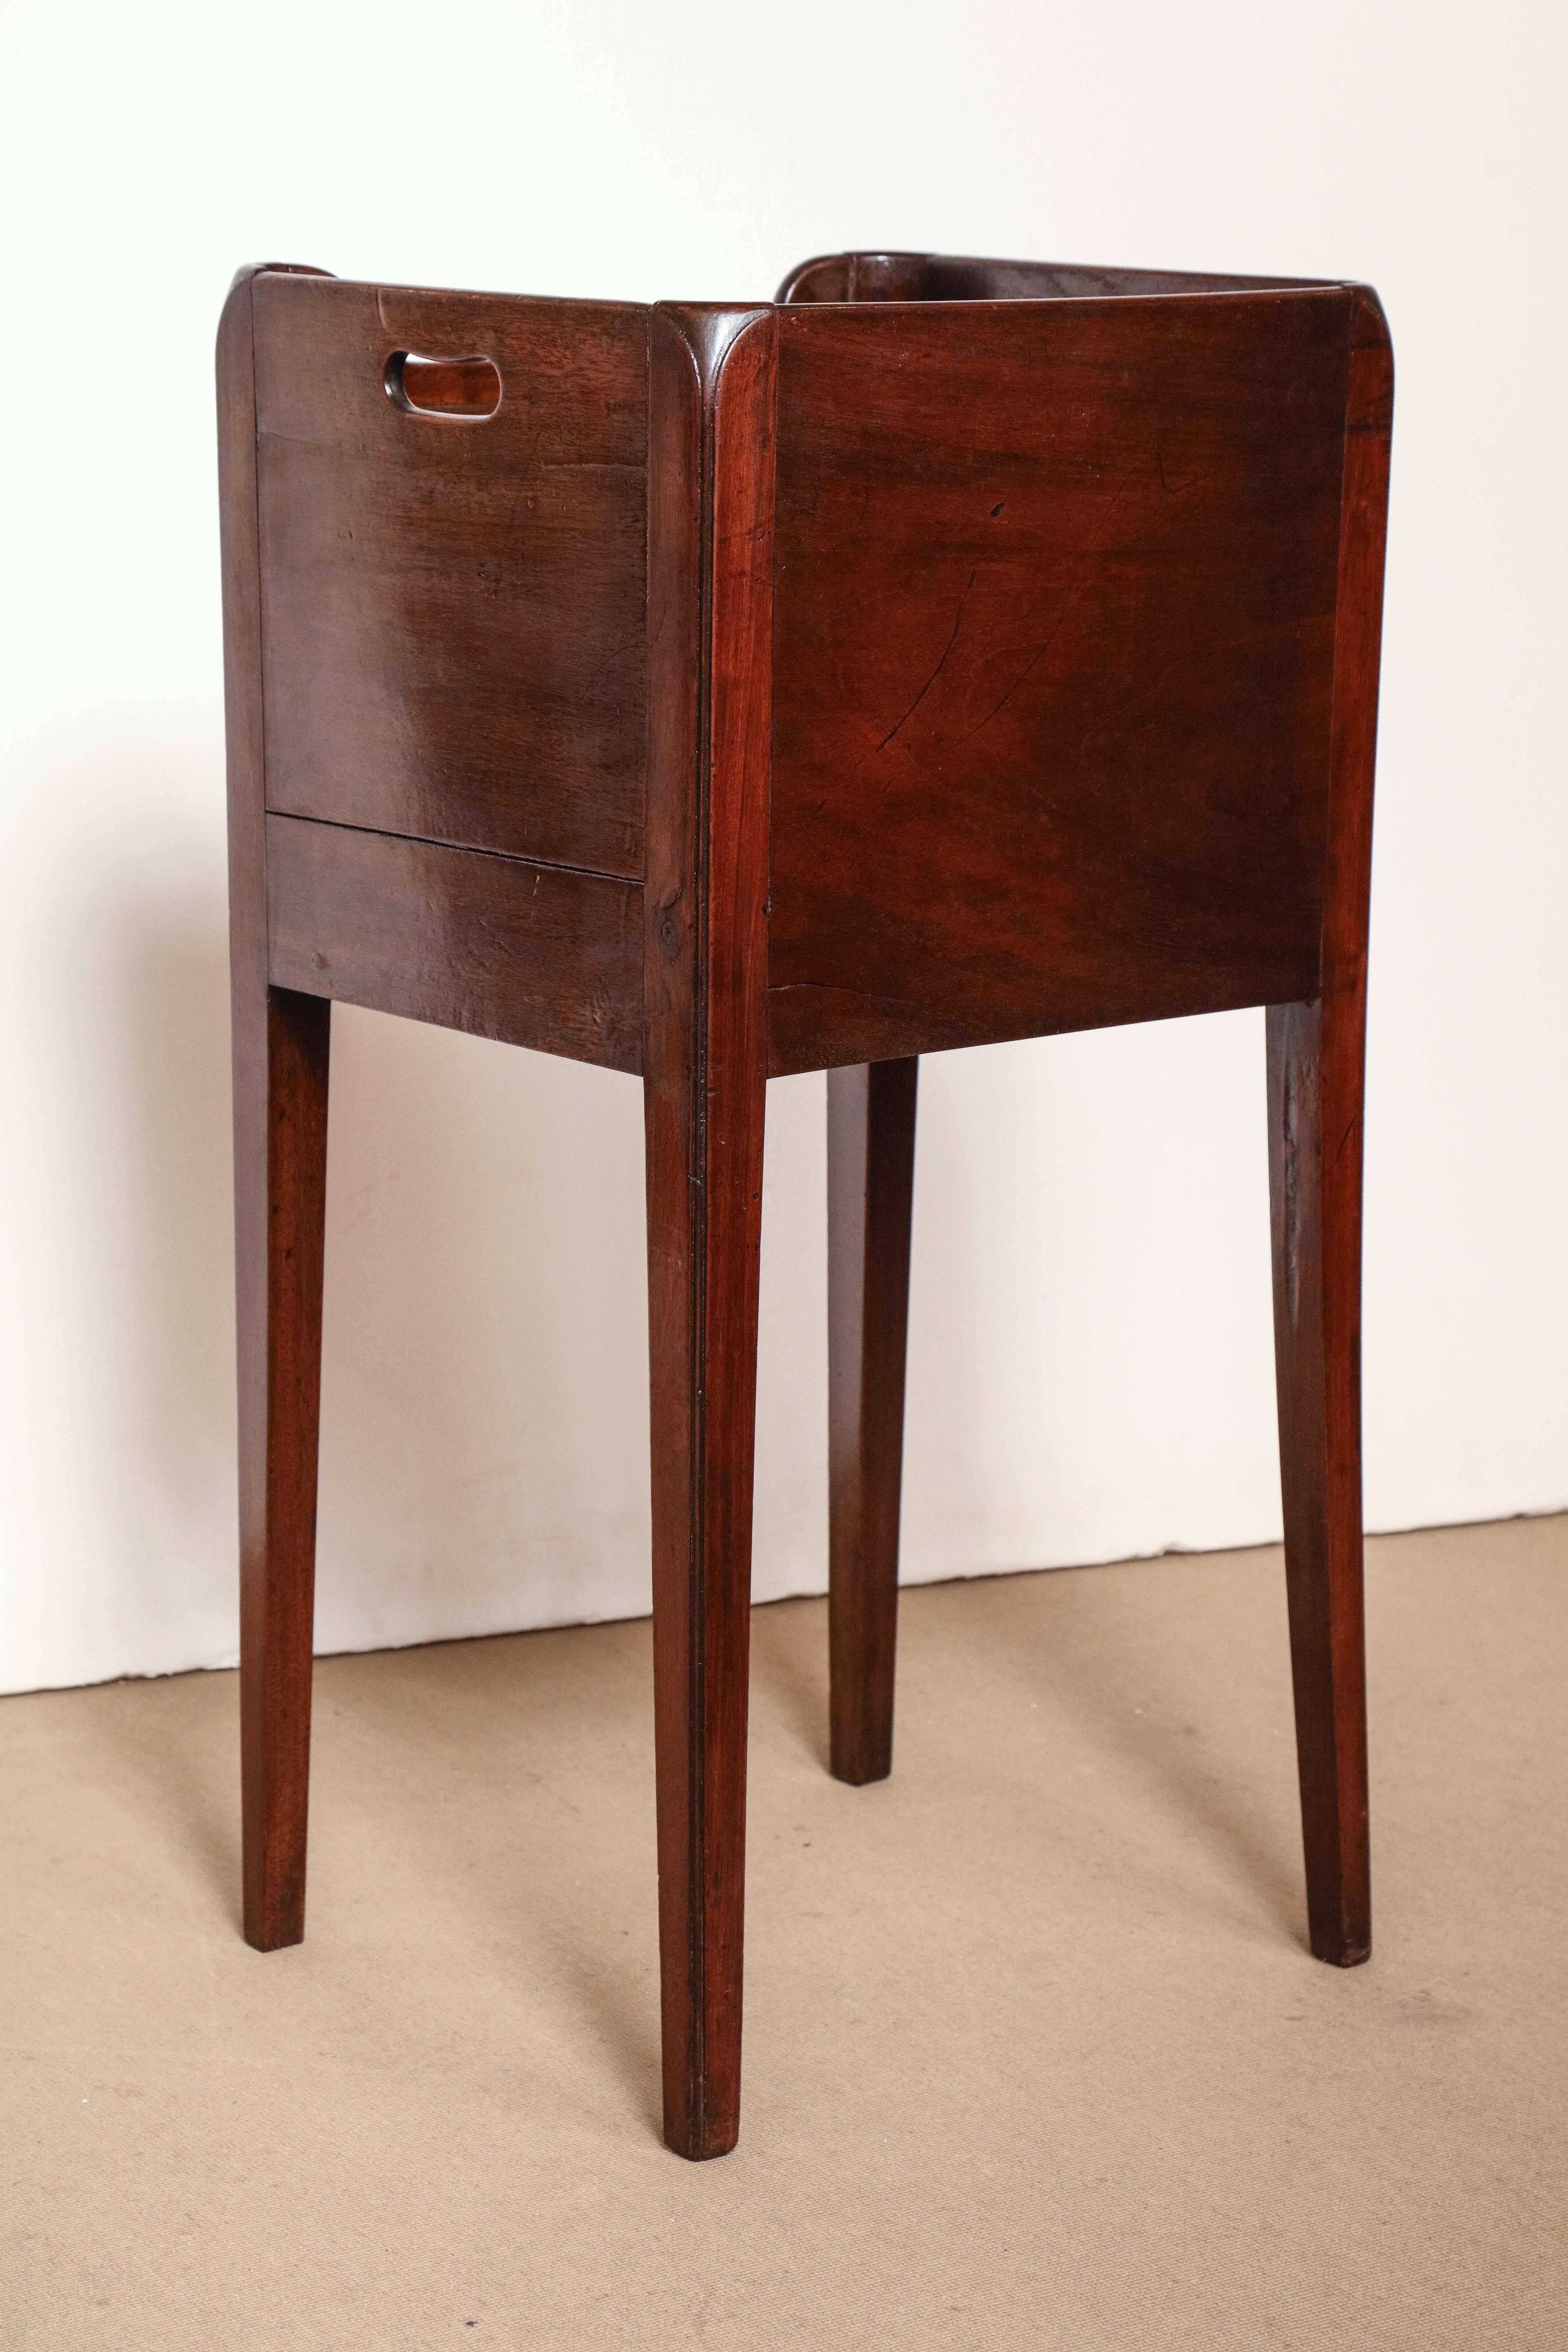 Early 19th Century English, Tambour Door Mahogany Table For Sale 3